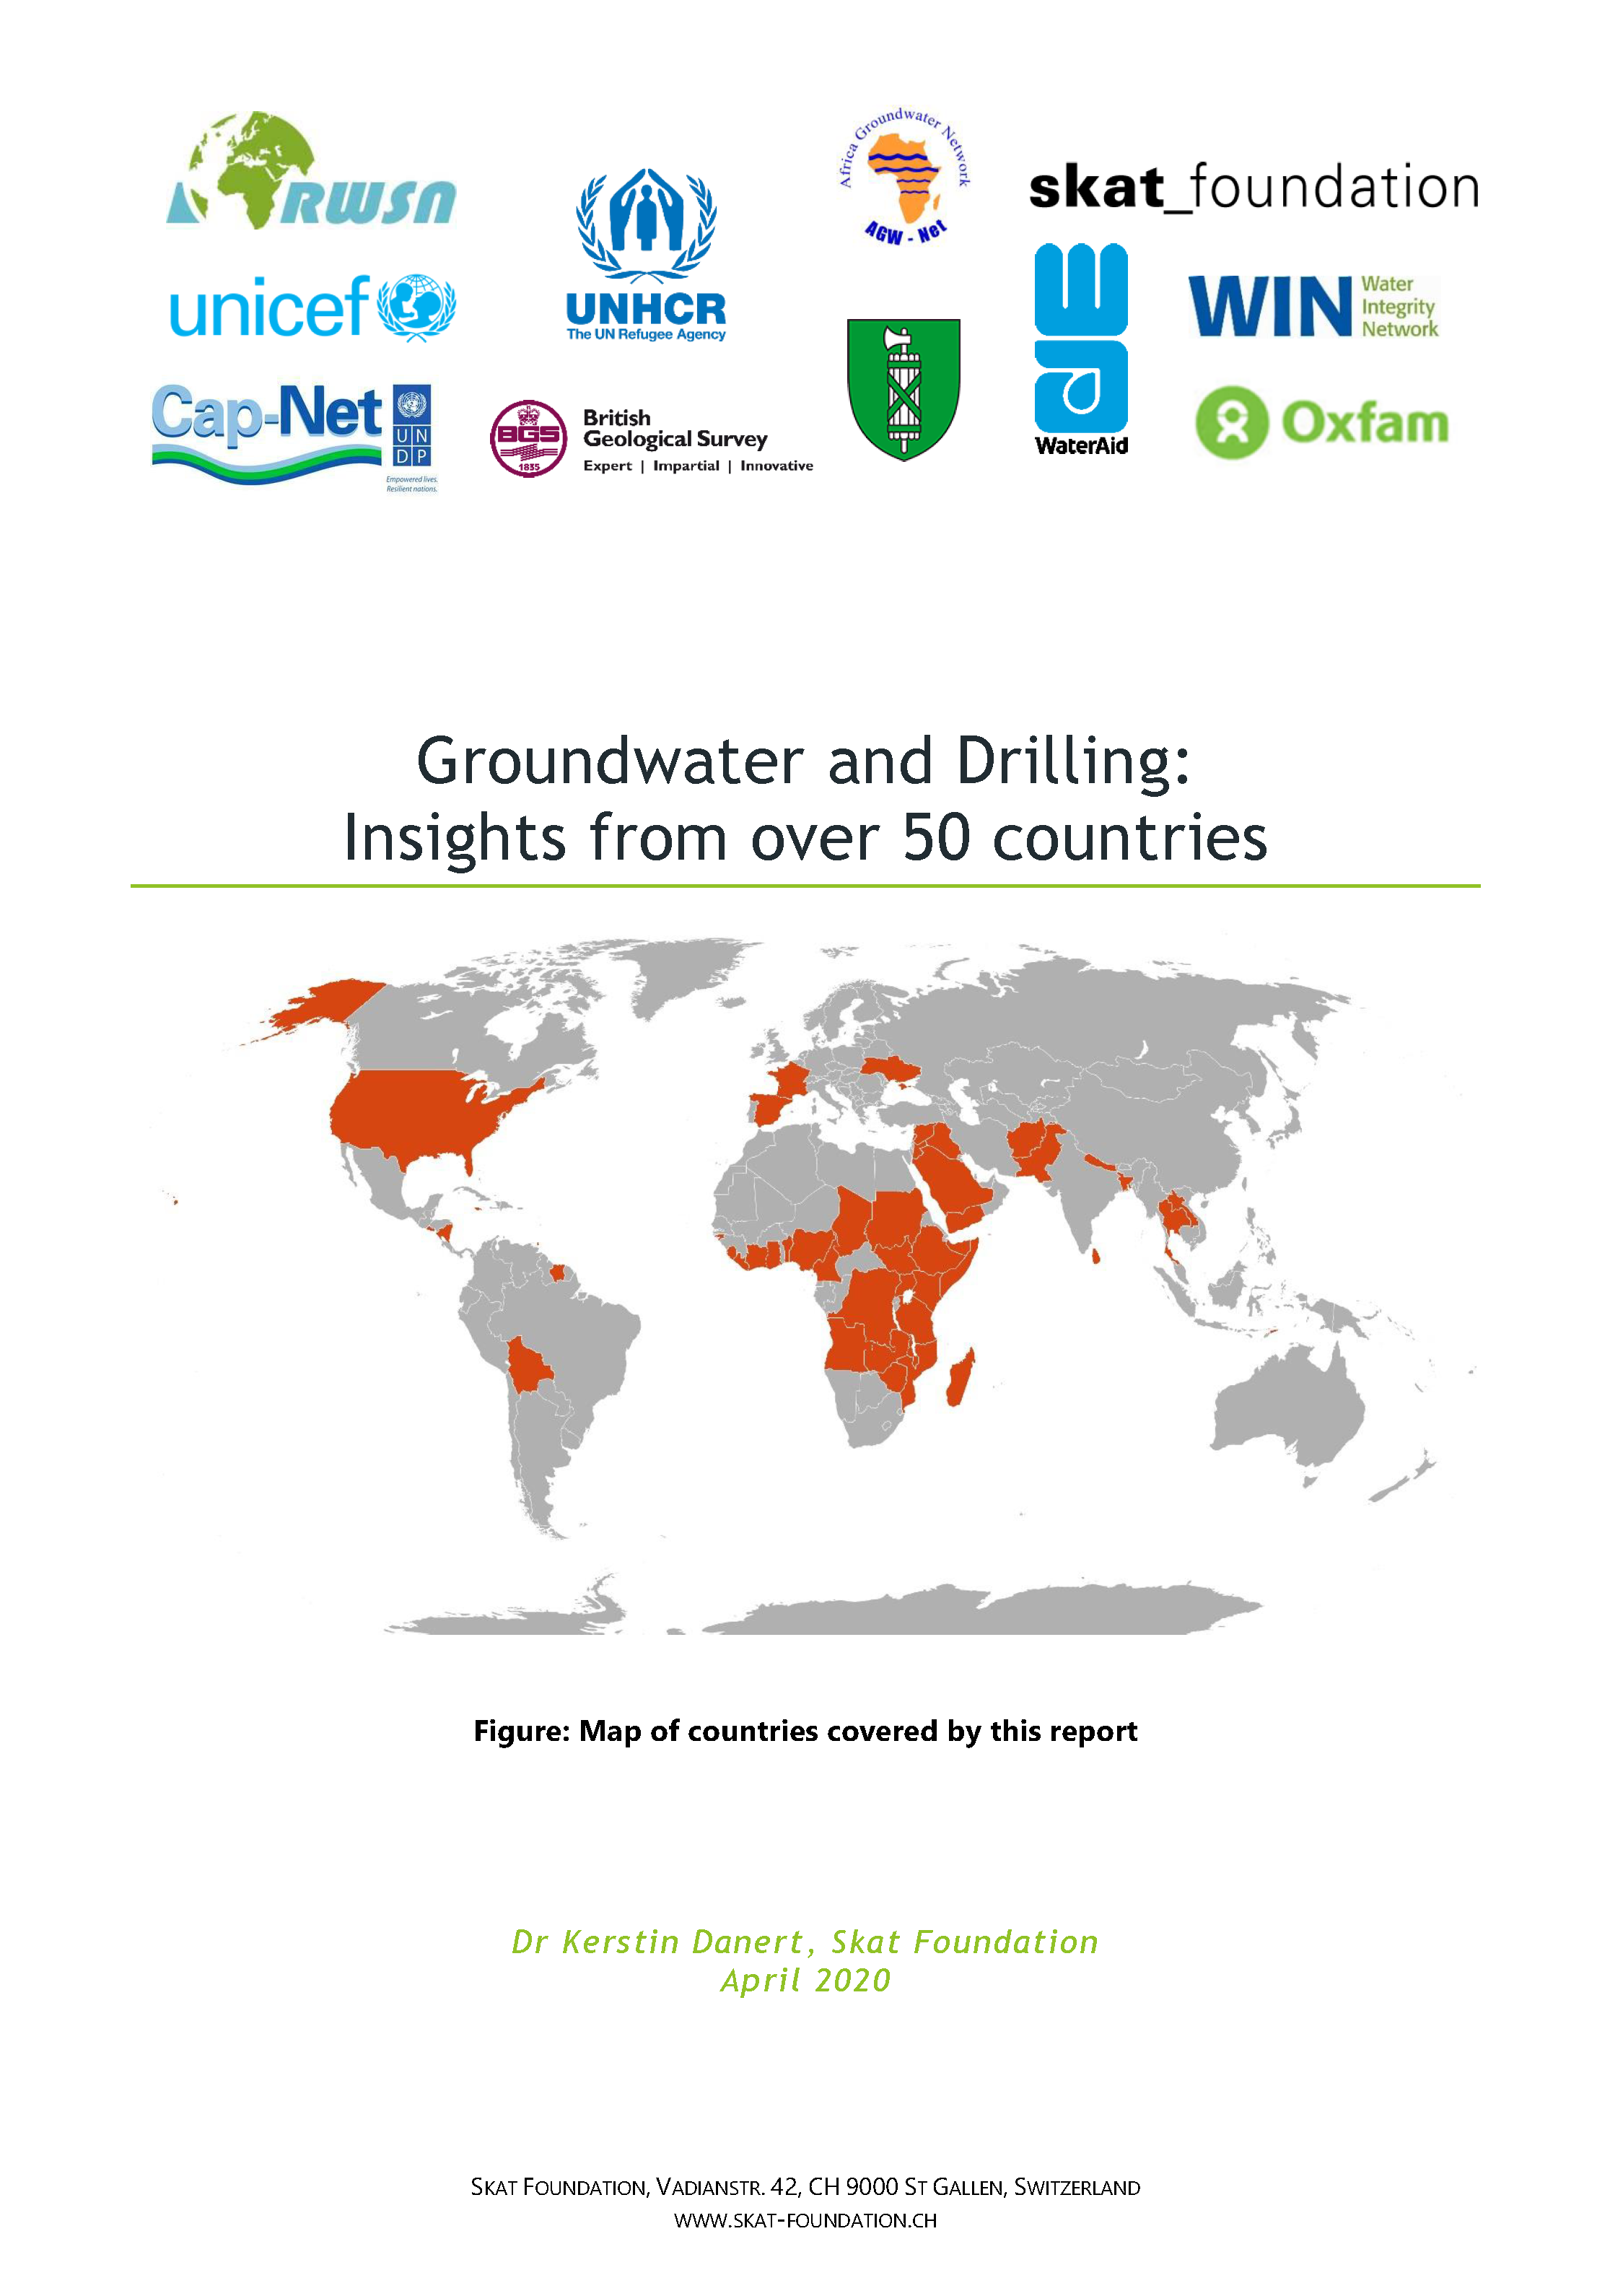 Cover page for Groundwater and Drilling: Insights from Over 50 countries